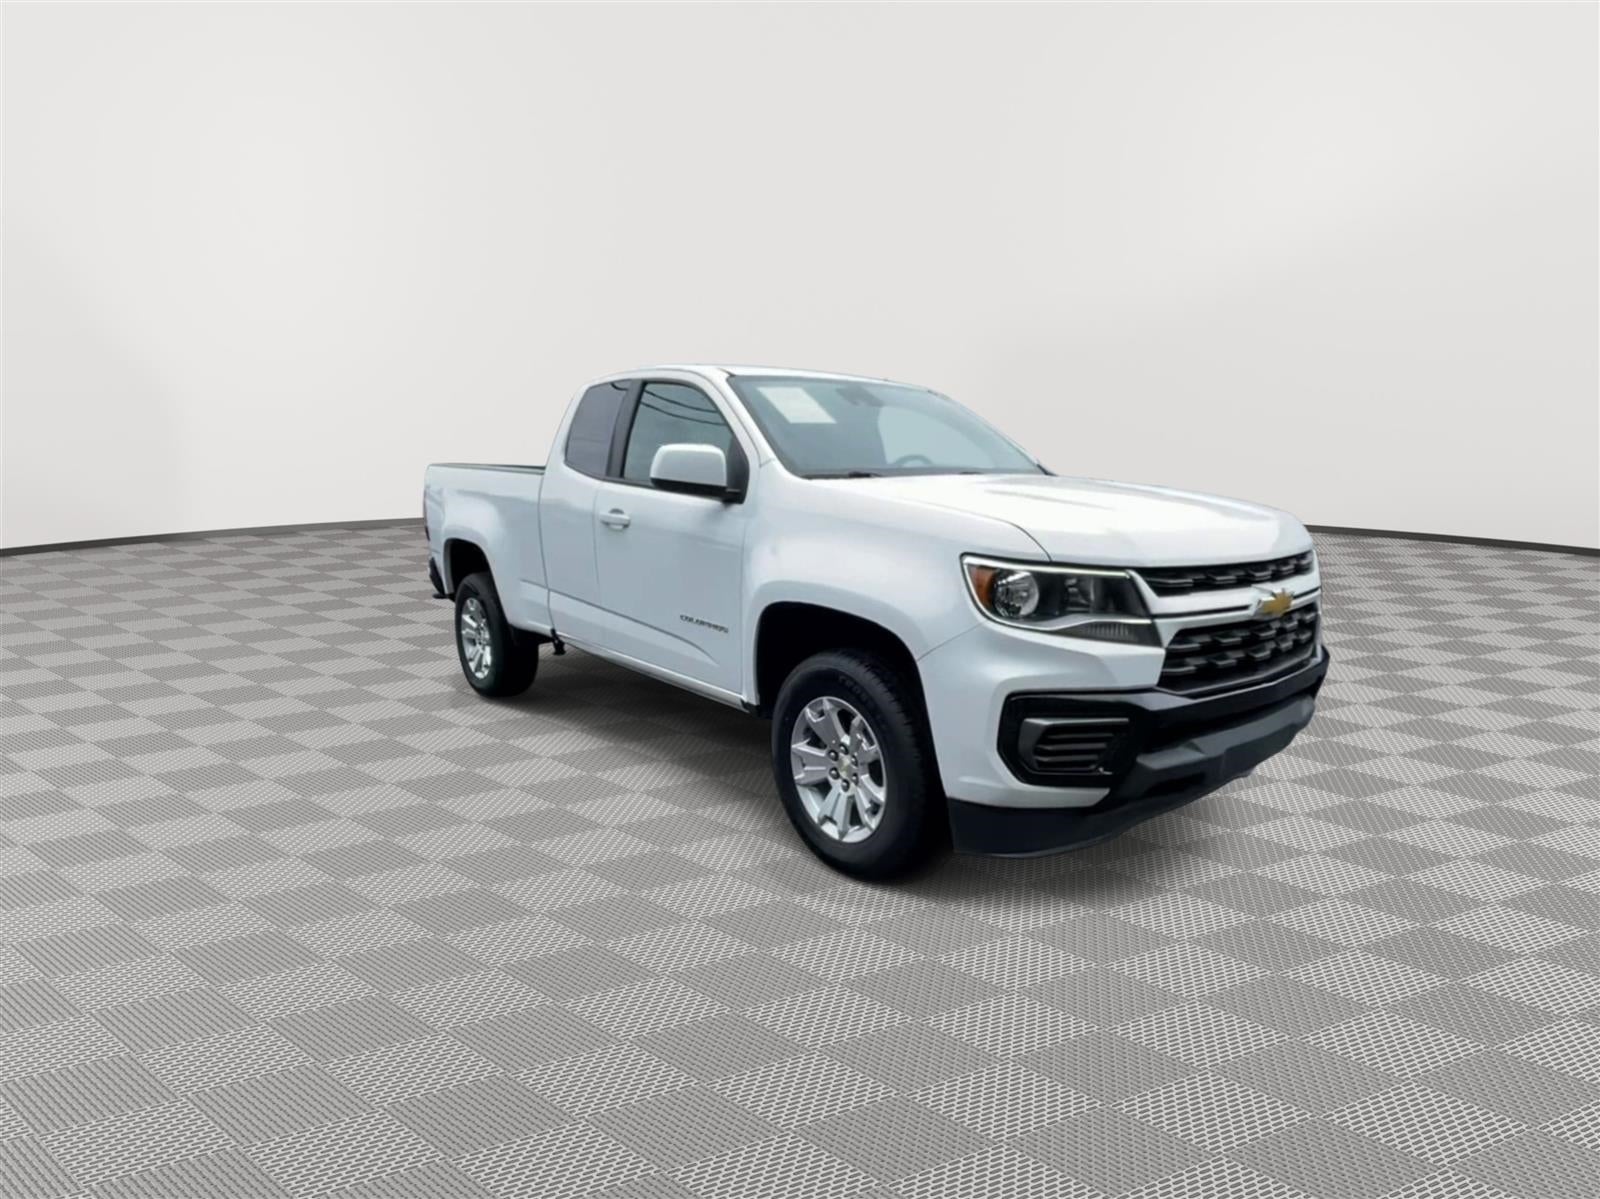 2021 Chevrolet Colorado 2WD Extended Cab Long Box LT